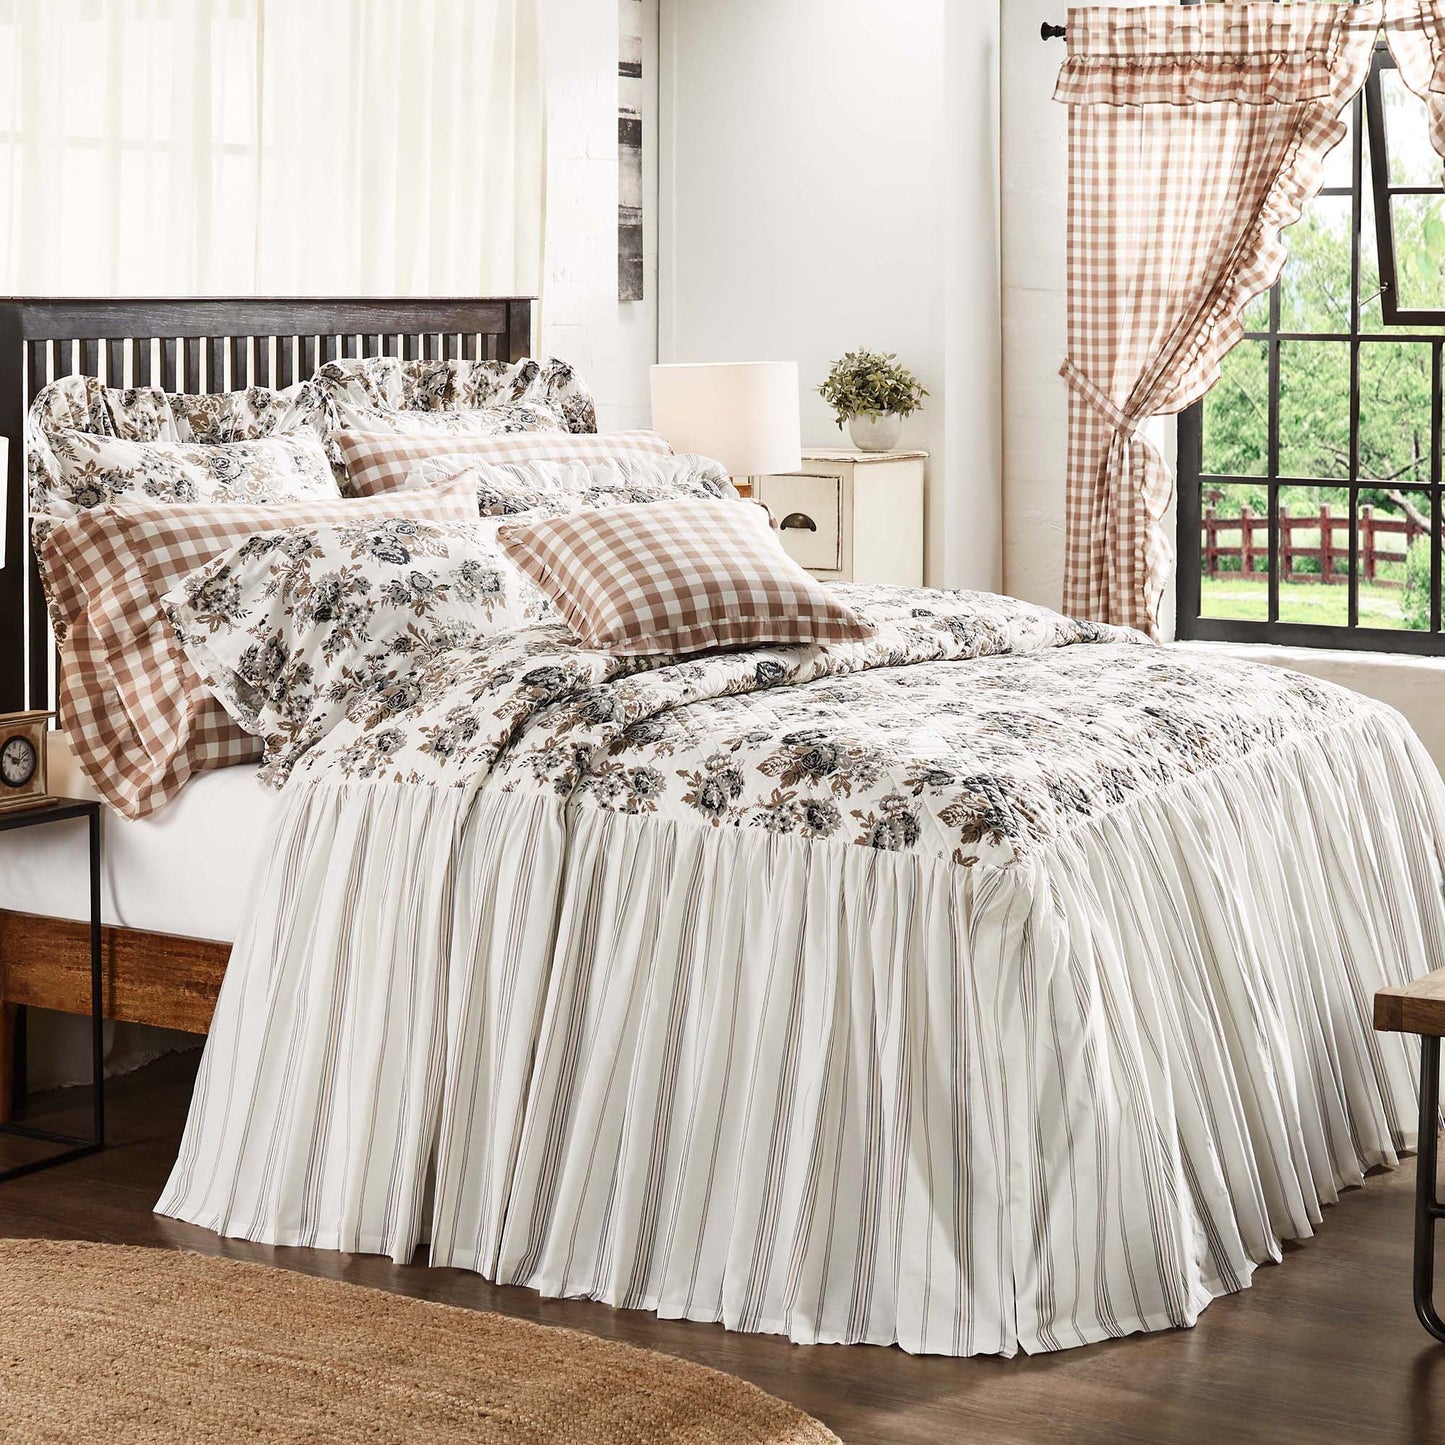 70011-Annie-Portabella-Floral-Ruffled-King-Coverlet-80x76-27-image-5